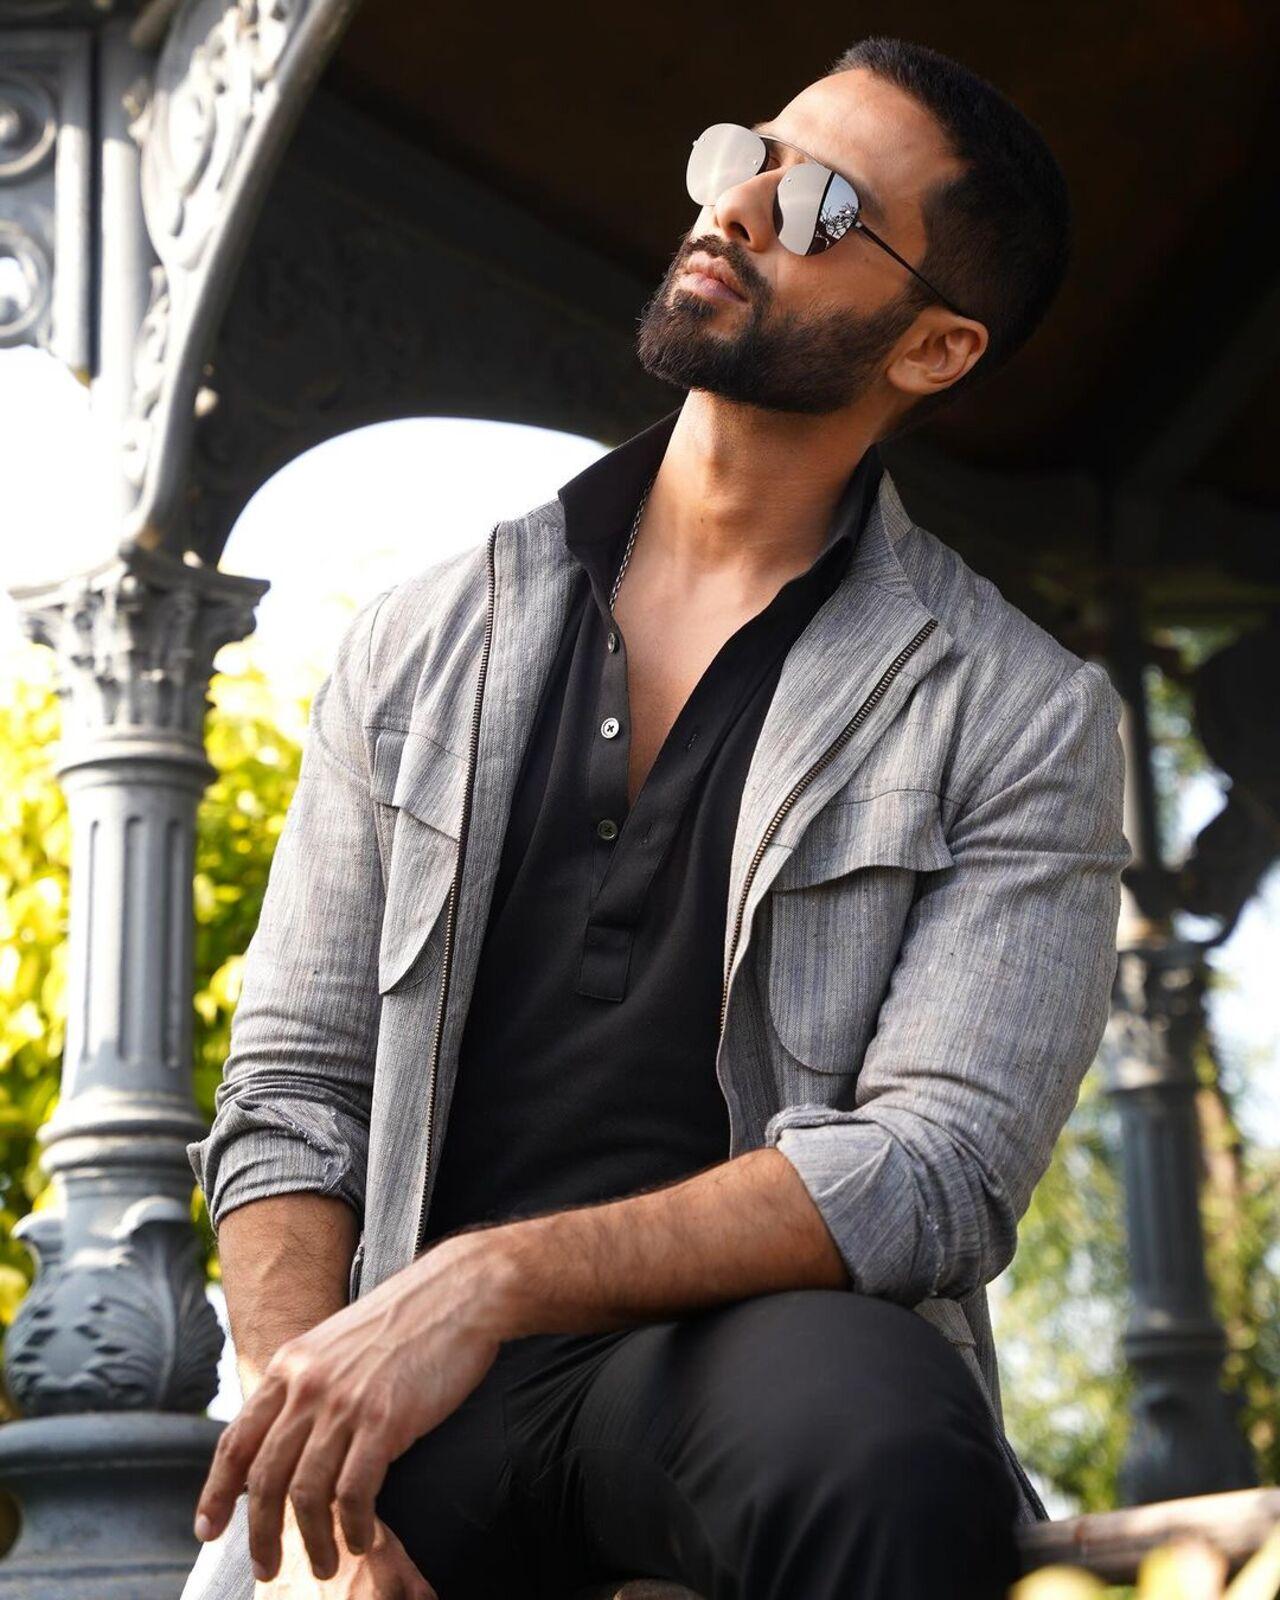 Shahid Kapoor opted for semi-formal look as he paired his black shirt and pants with a grey blazzer